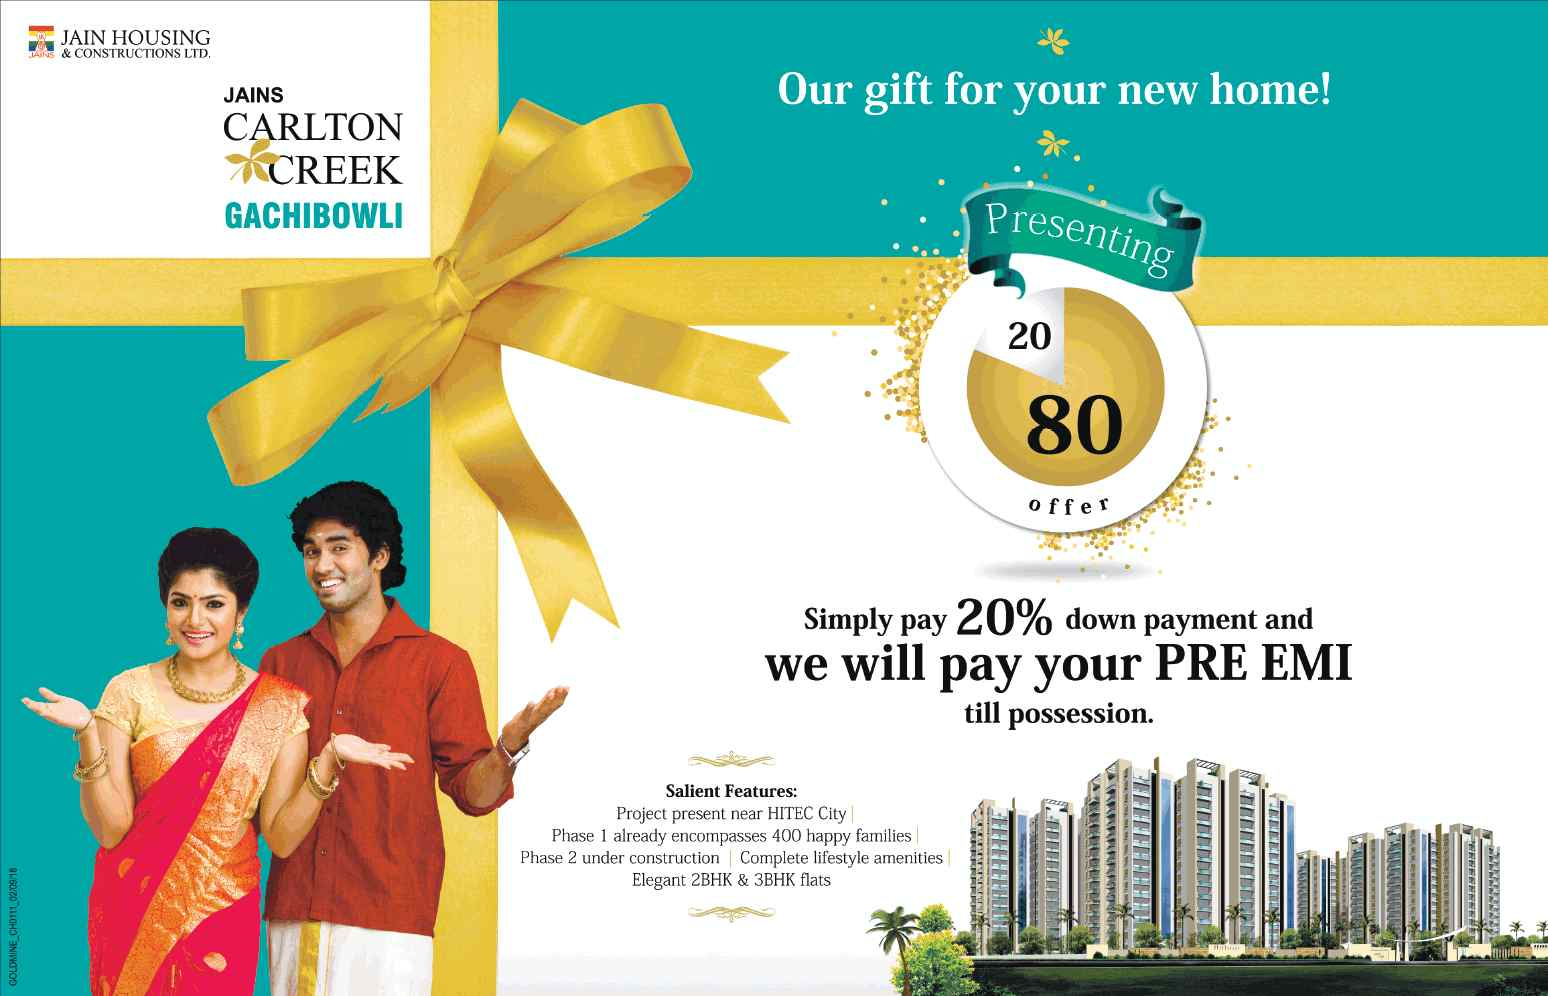 Pay 20% down payment and no pre EMI till possession at Jains Carlton Creek in Hyderabad Update